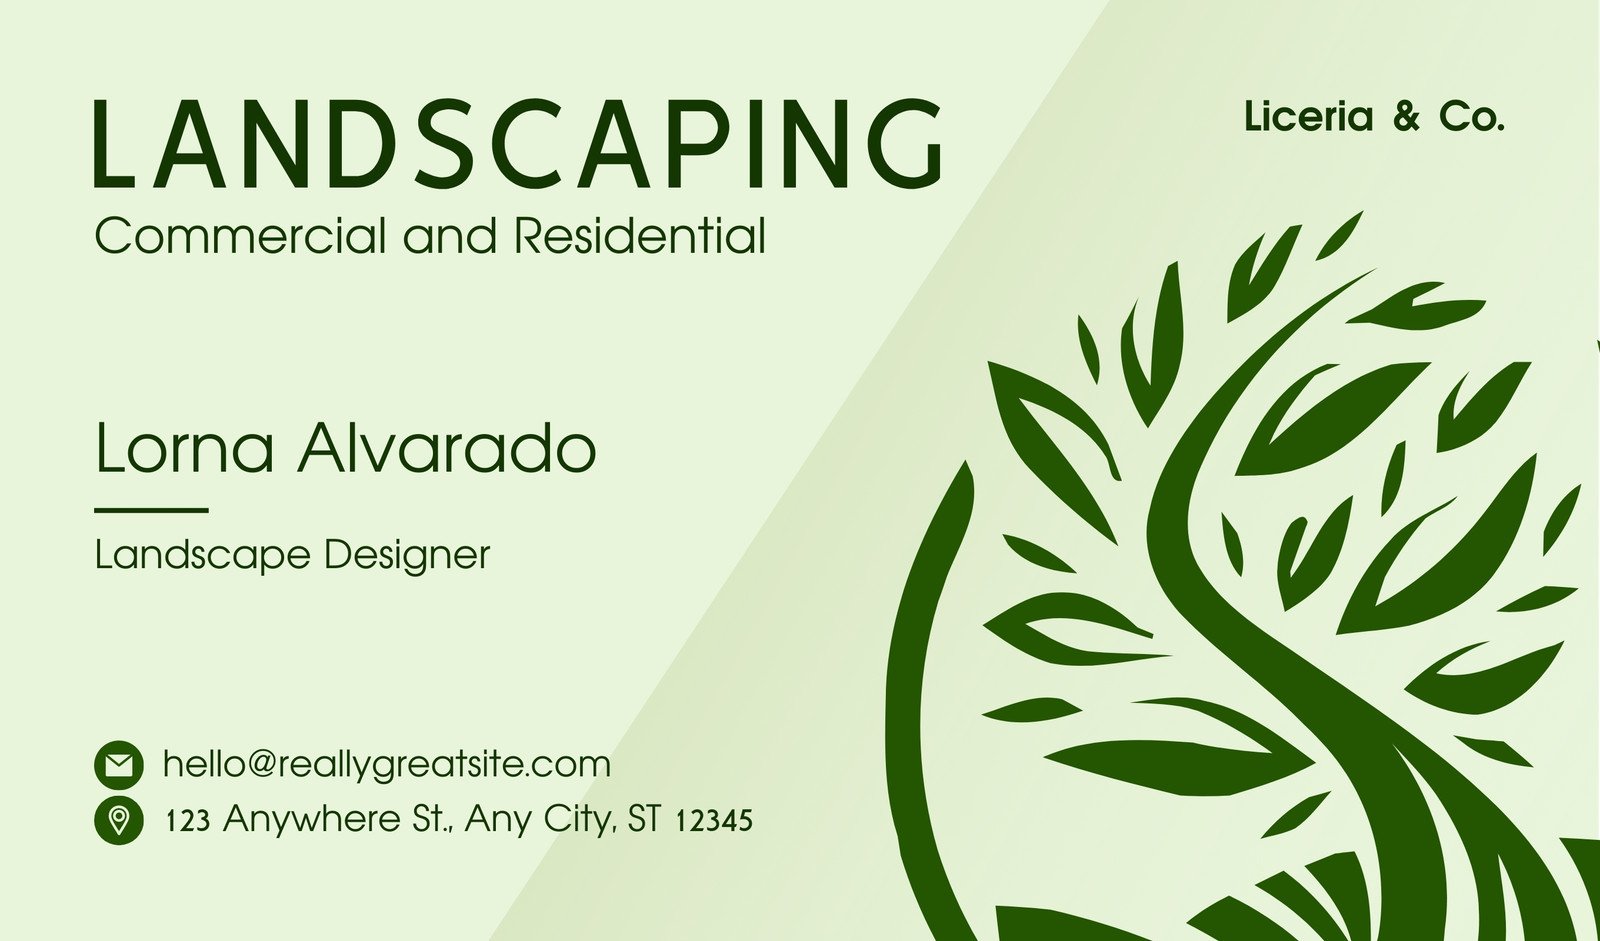 Free, printable custom landscaping business card templates | Canva